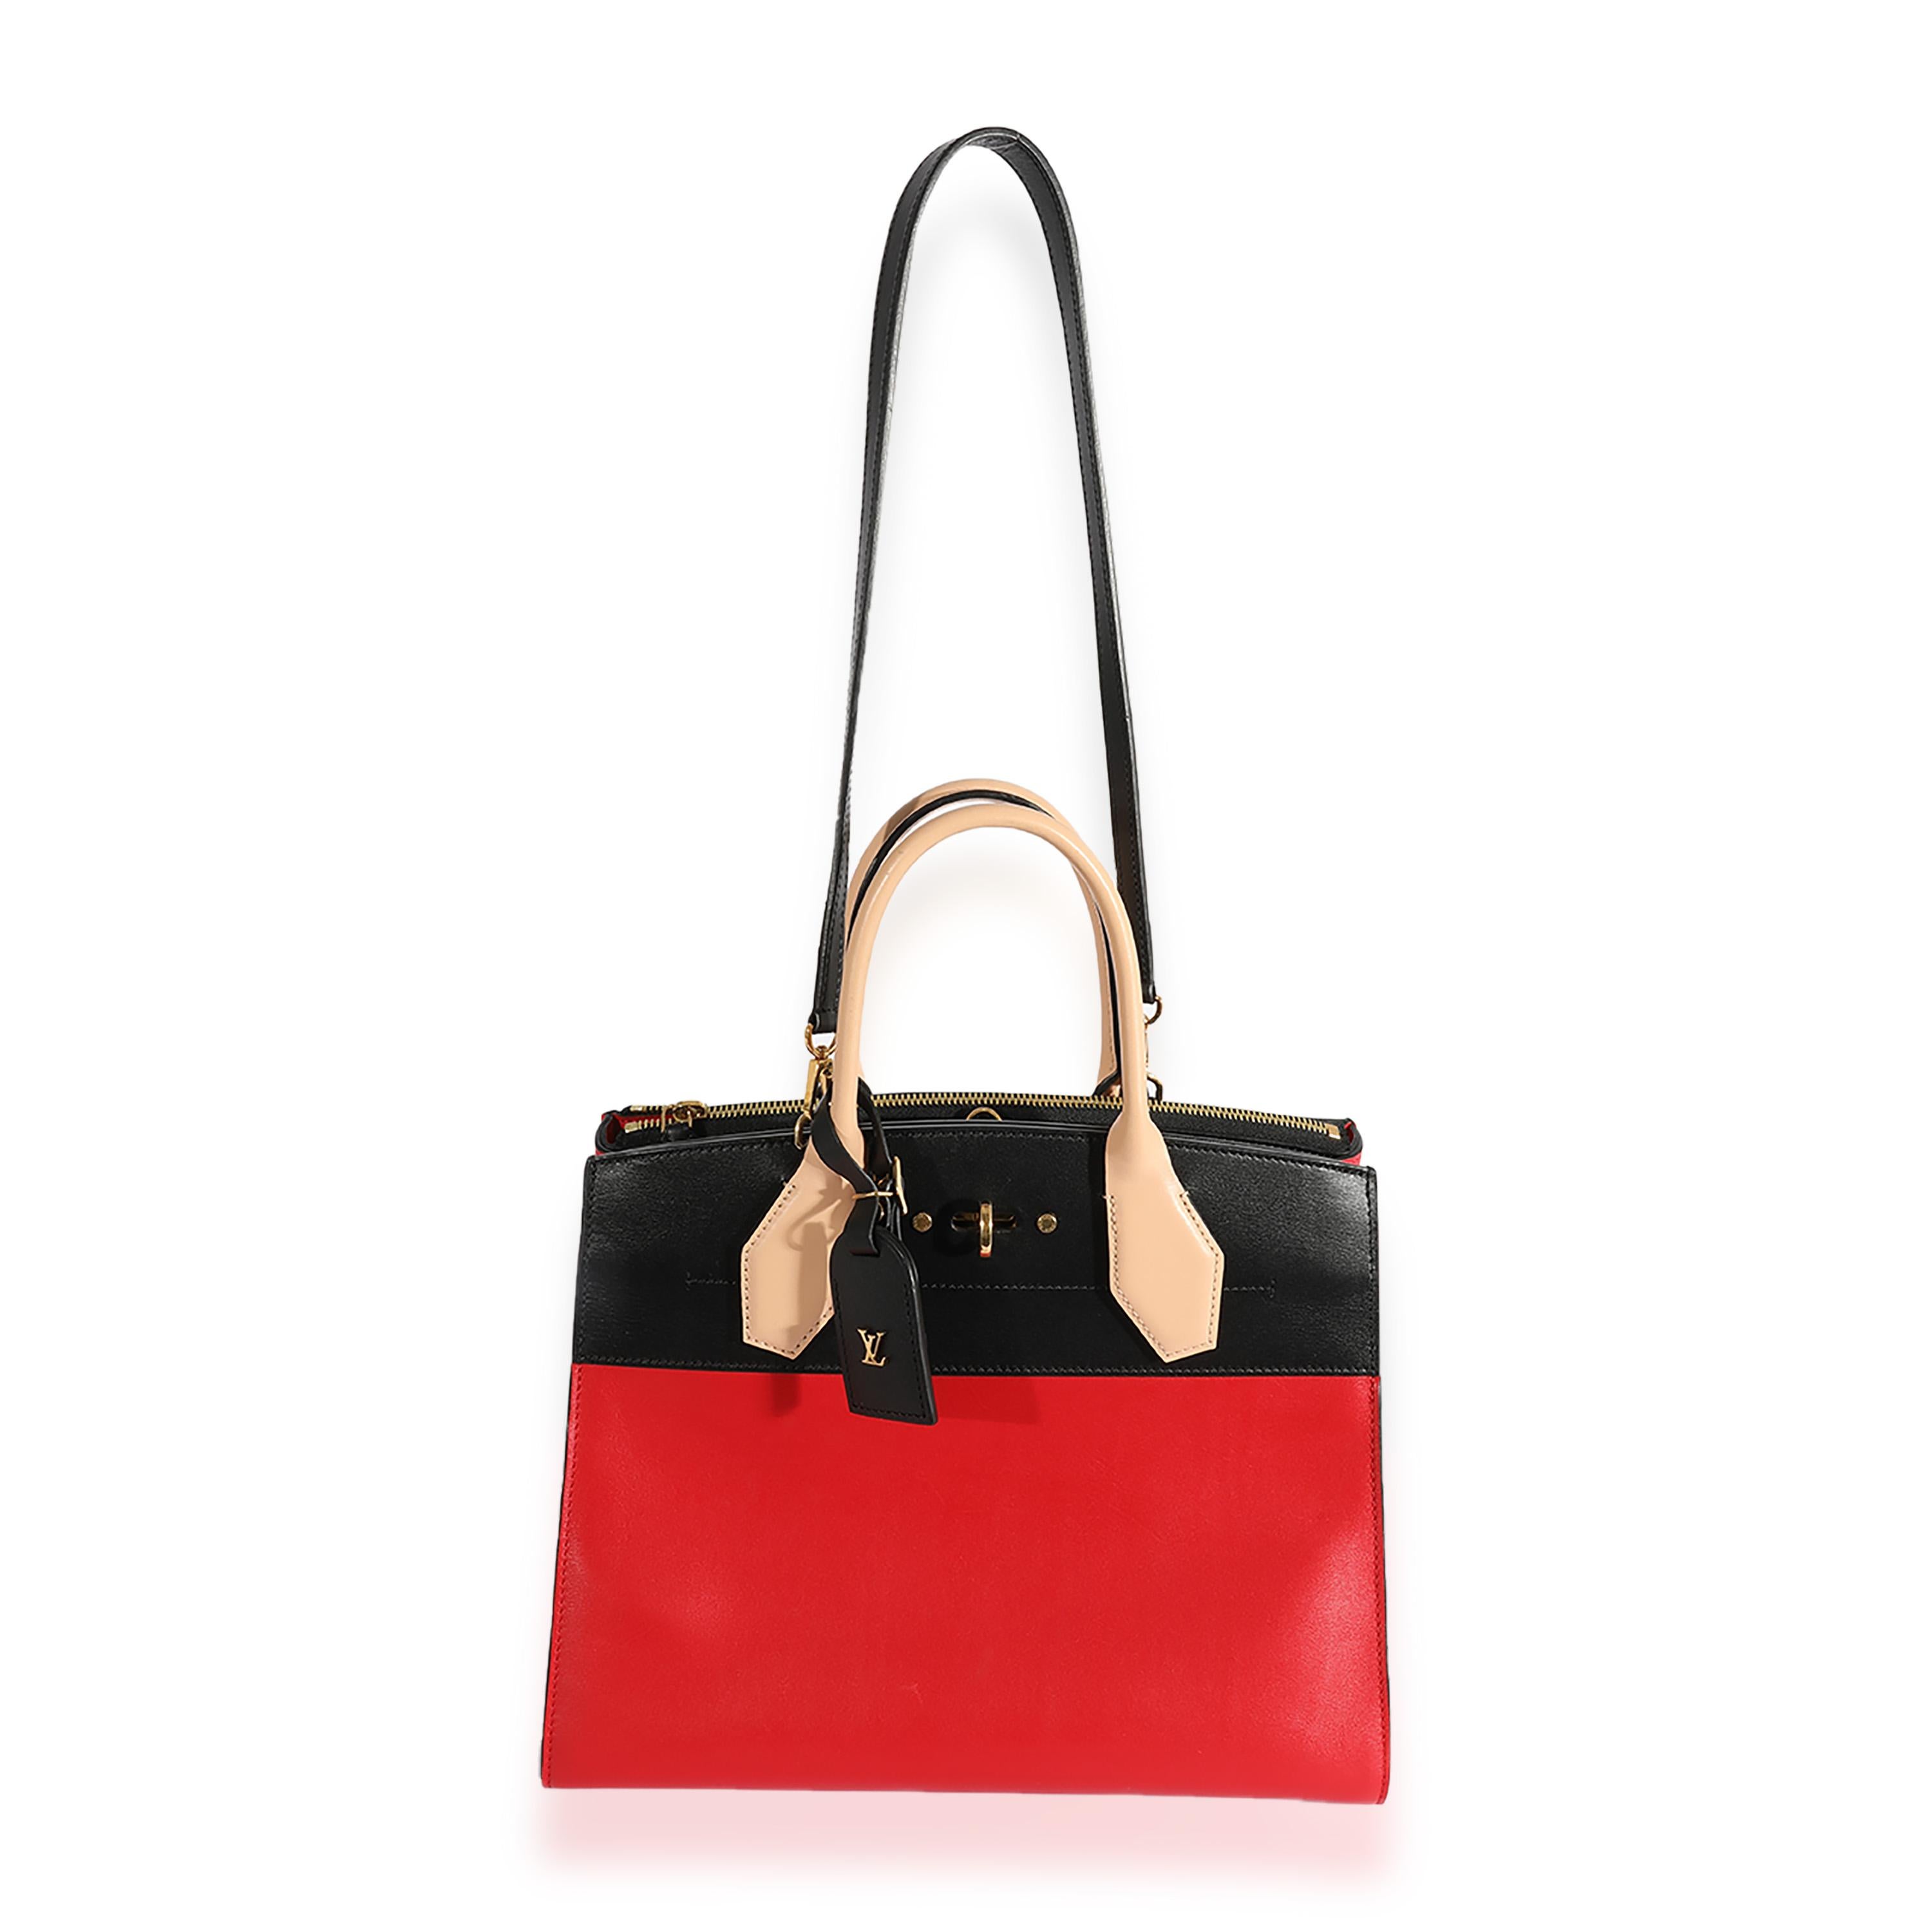 Listing Title: Louis Vuitton Rouge & Black Calfskin City Steamer MM
SKU: 123519
MSRP: 4450.00
Condition: Pre-owned 
Handbag Condition: Very Good
Condition Comments: Very Good Condition. Scuffing and faint streaking throughout leather. Light scuffing